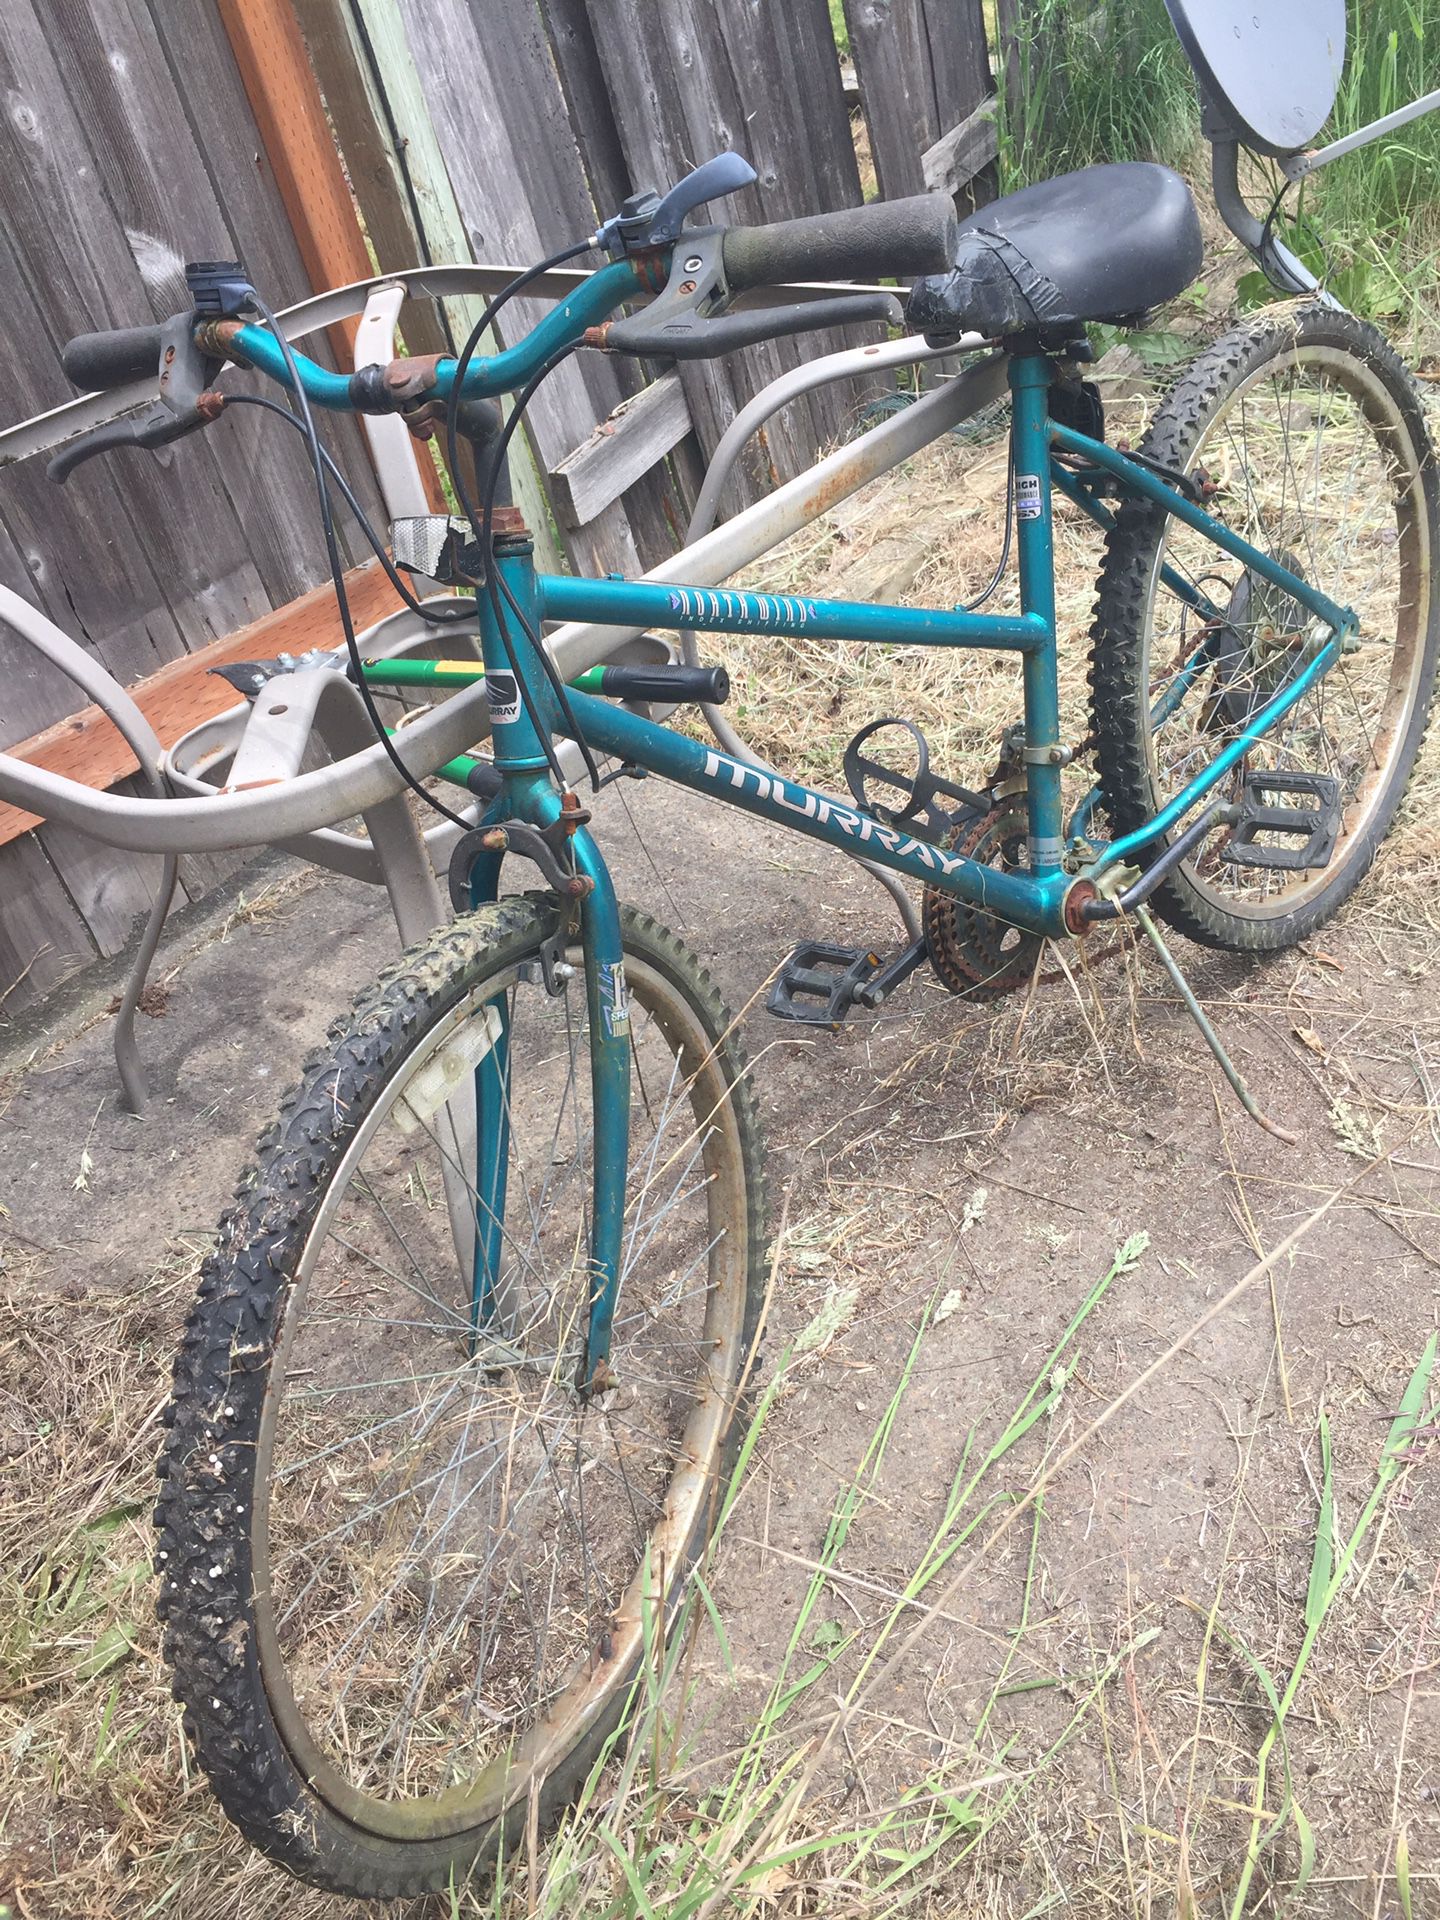 Adult Sized Used Rusty Bikes (Two)